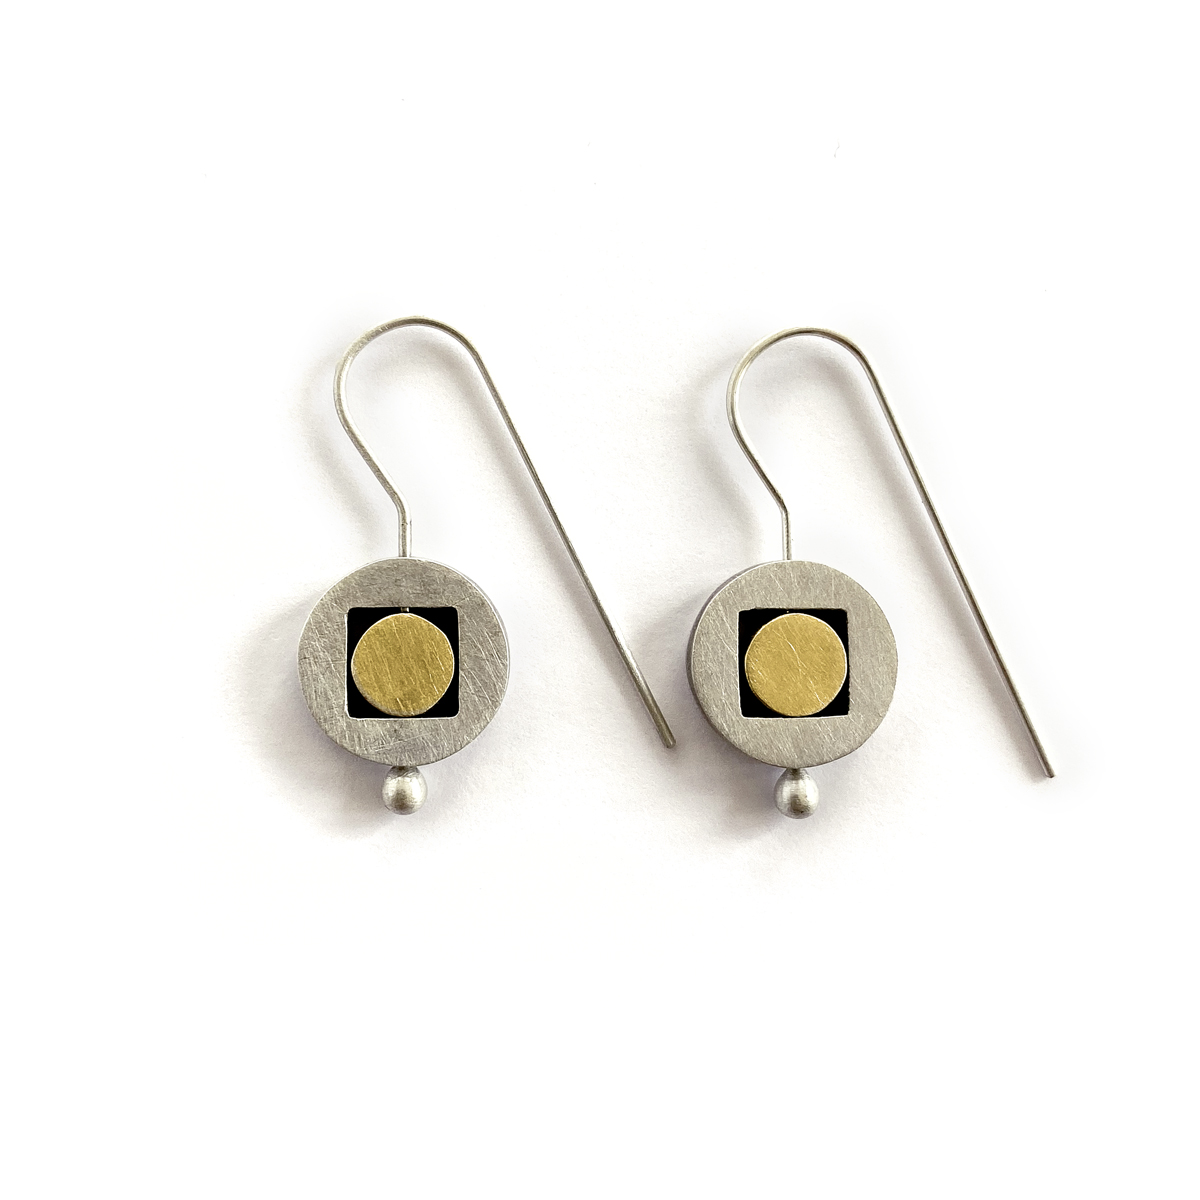 Within You Earrings, sterling silver, 9ct gold, 2020, Kate Alterio